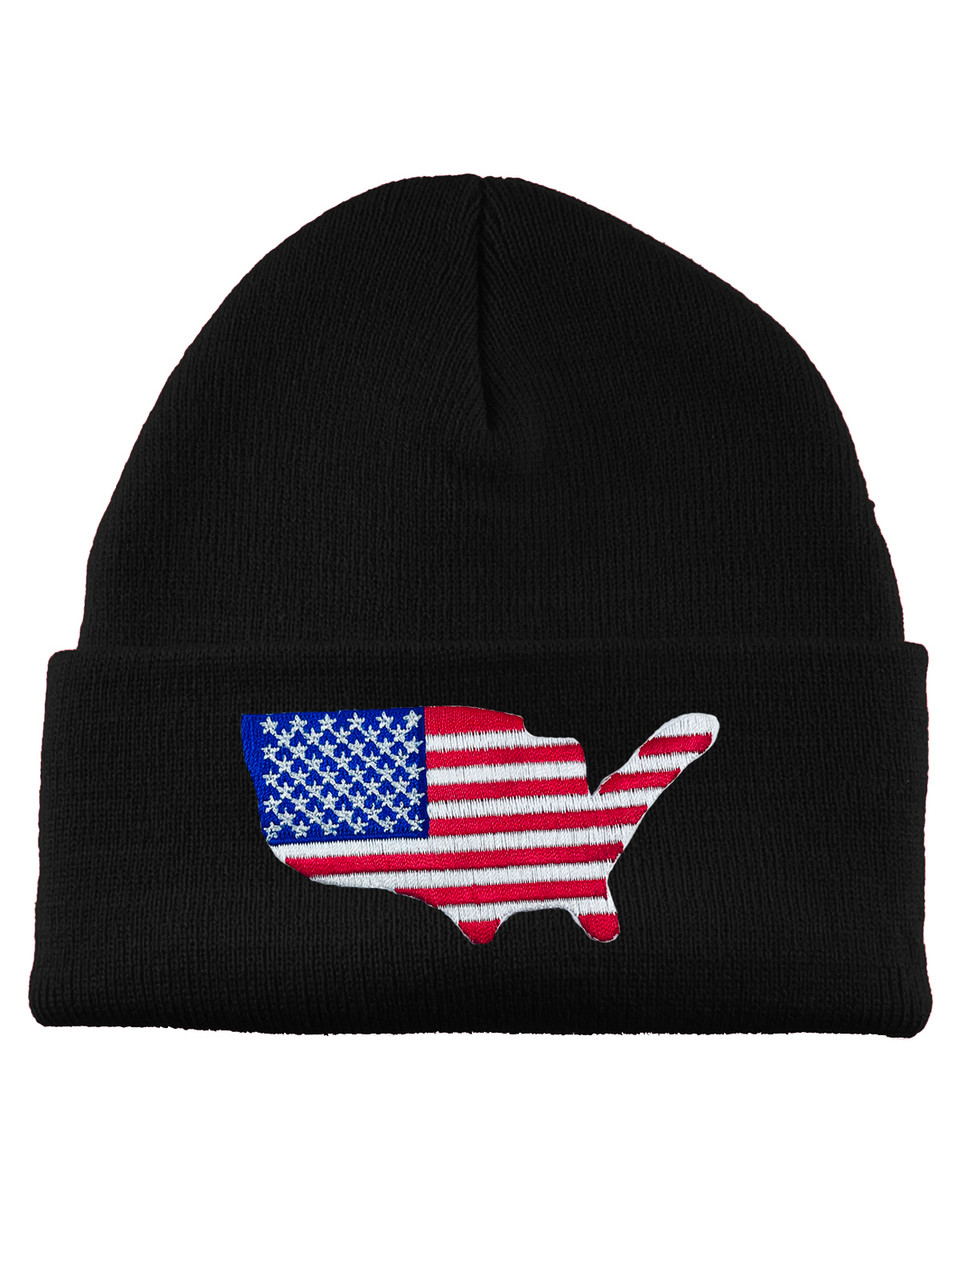 Gravity Threads USA Country Patch Cuffed Beanie - Gravity Trading